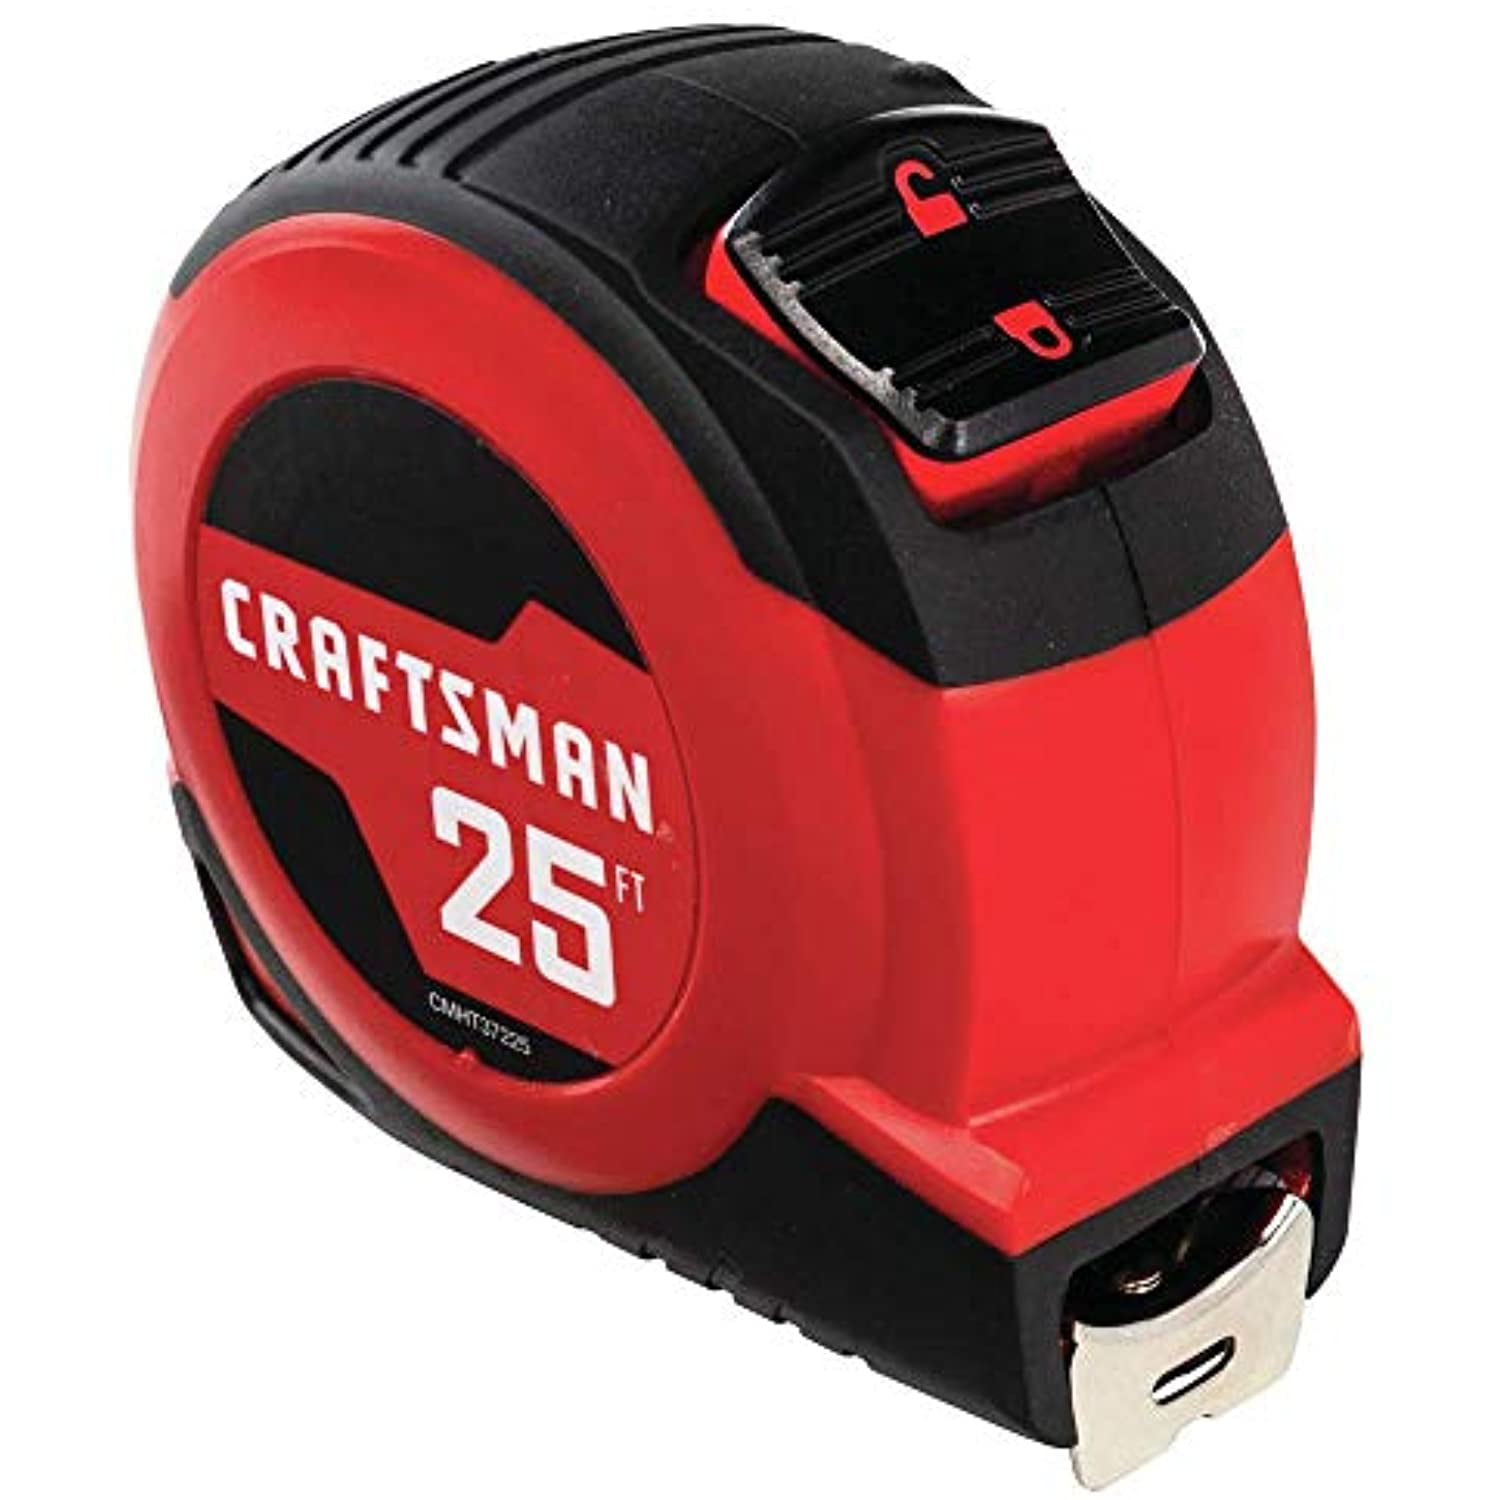 The Brushman, 25 ft. Manual Locking - Extra Wide Tape Measure